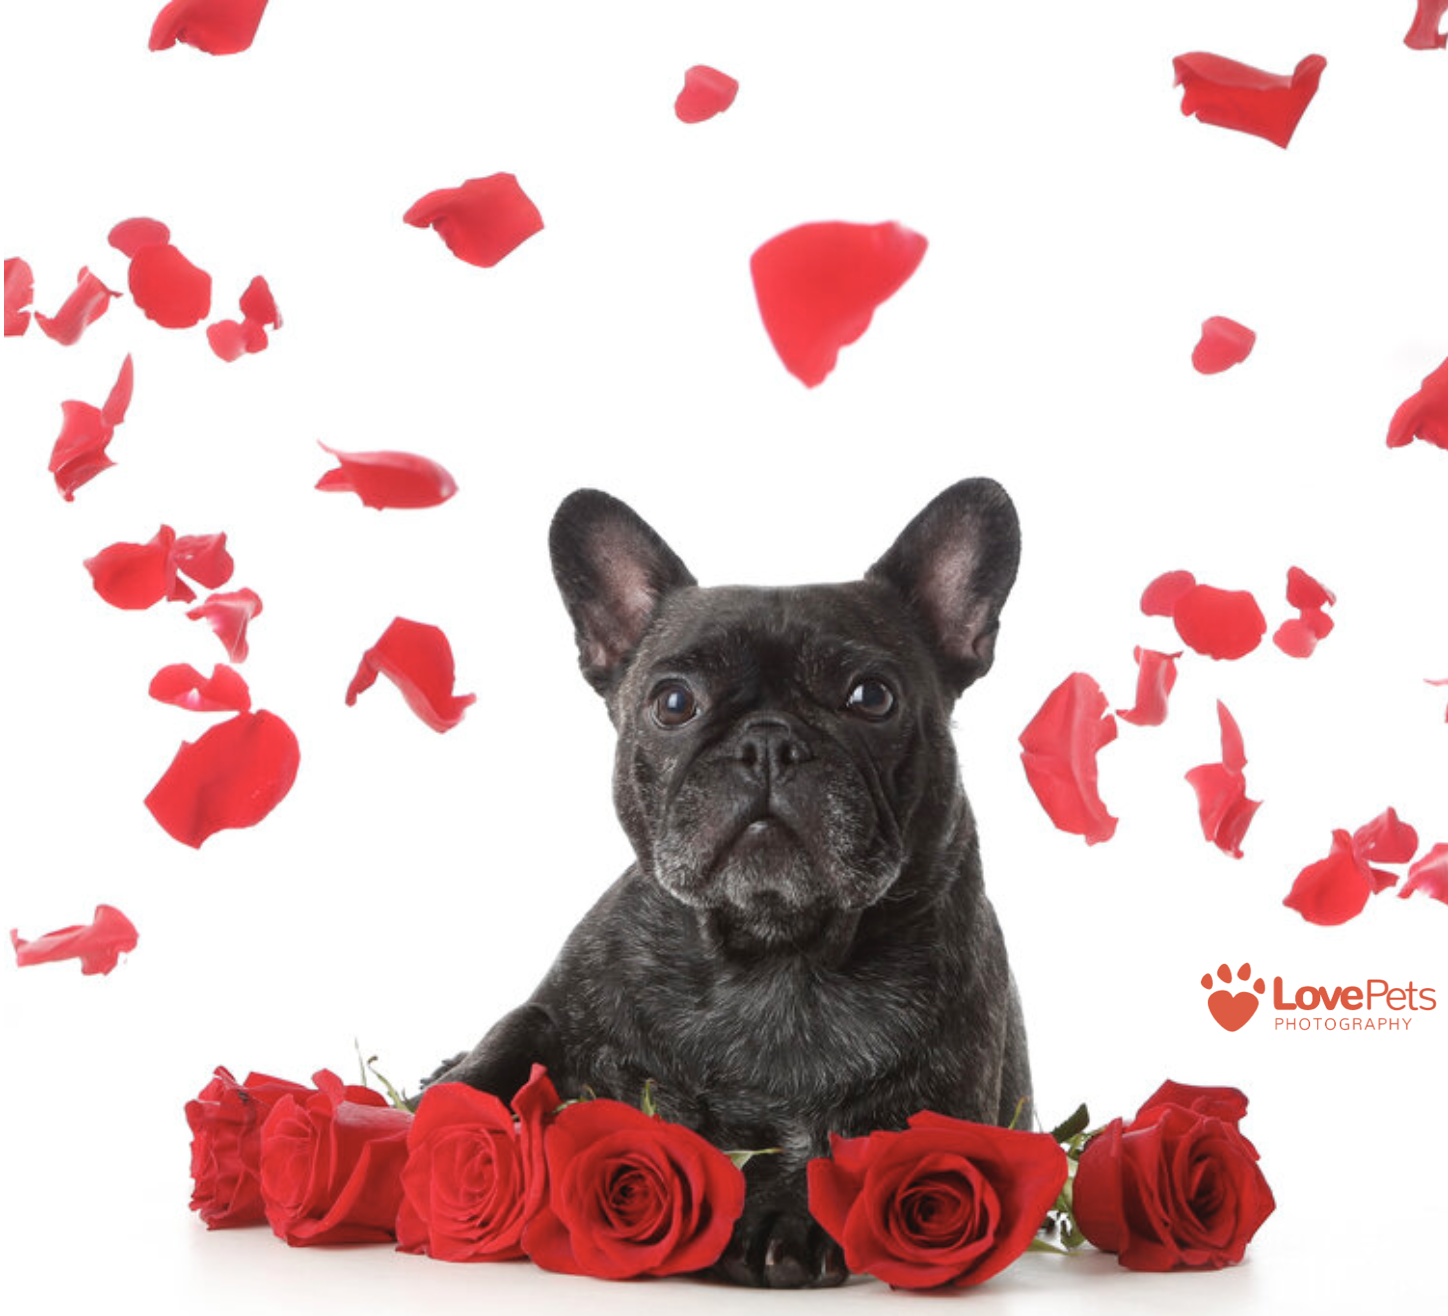 Petcationz Valentines Day Love Pets Photography